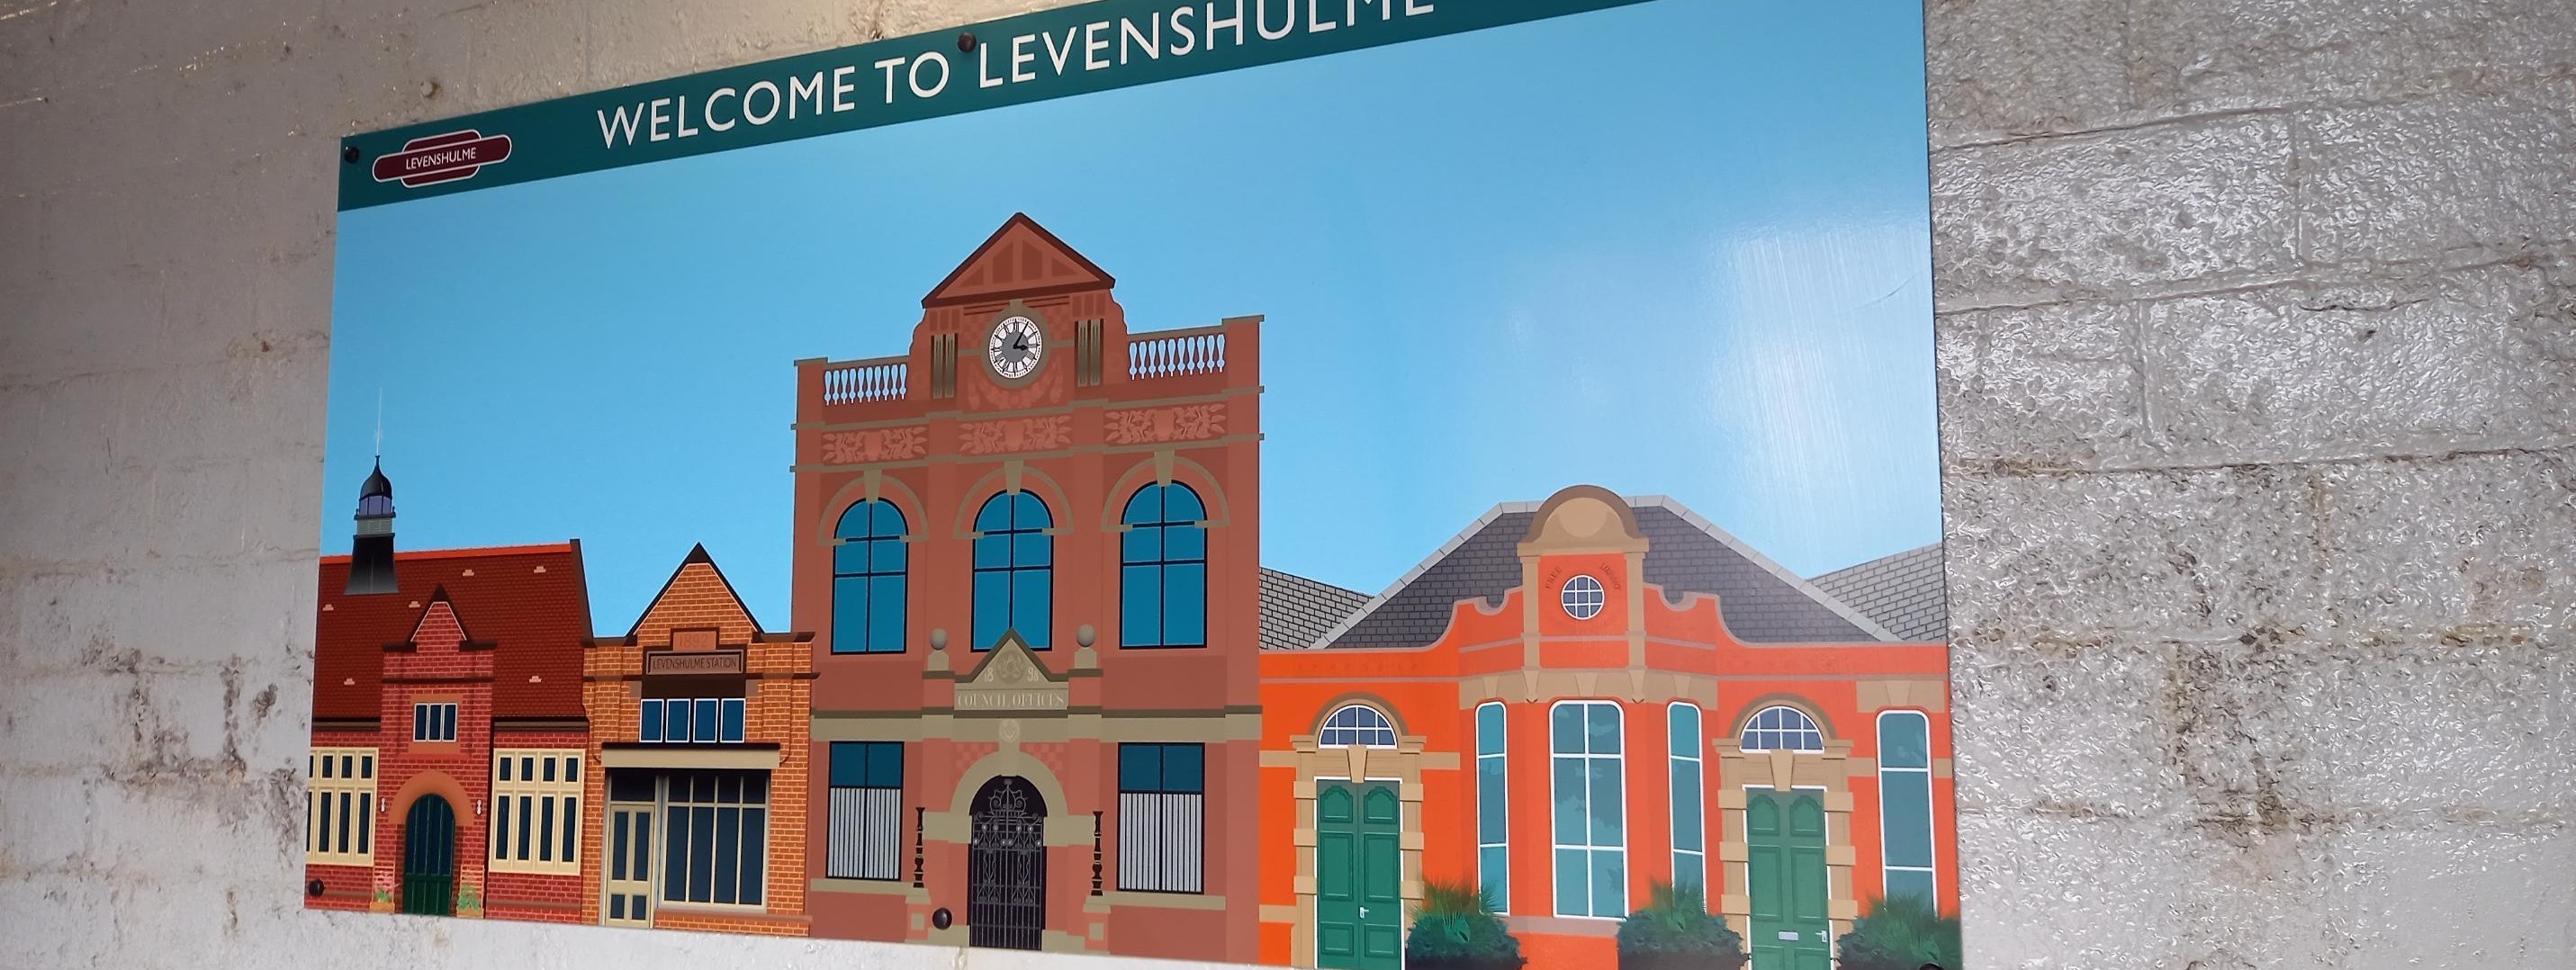 this-image-shows-art-at-levenshulme-depicting-the-antique-village